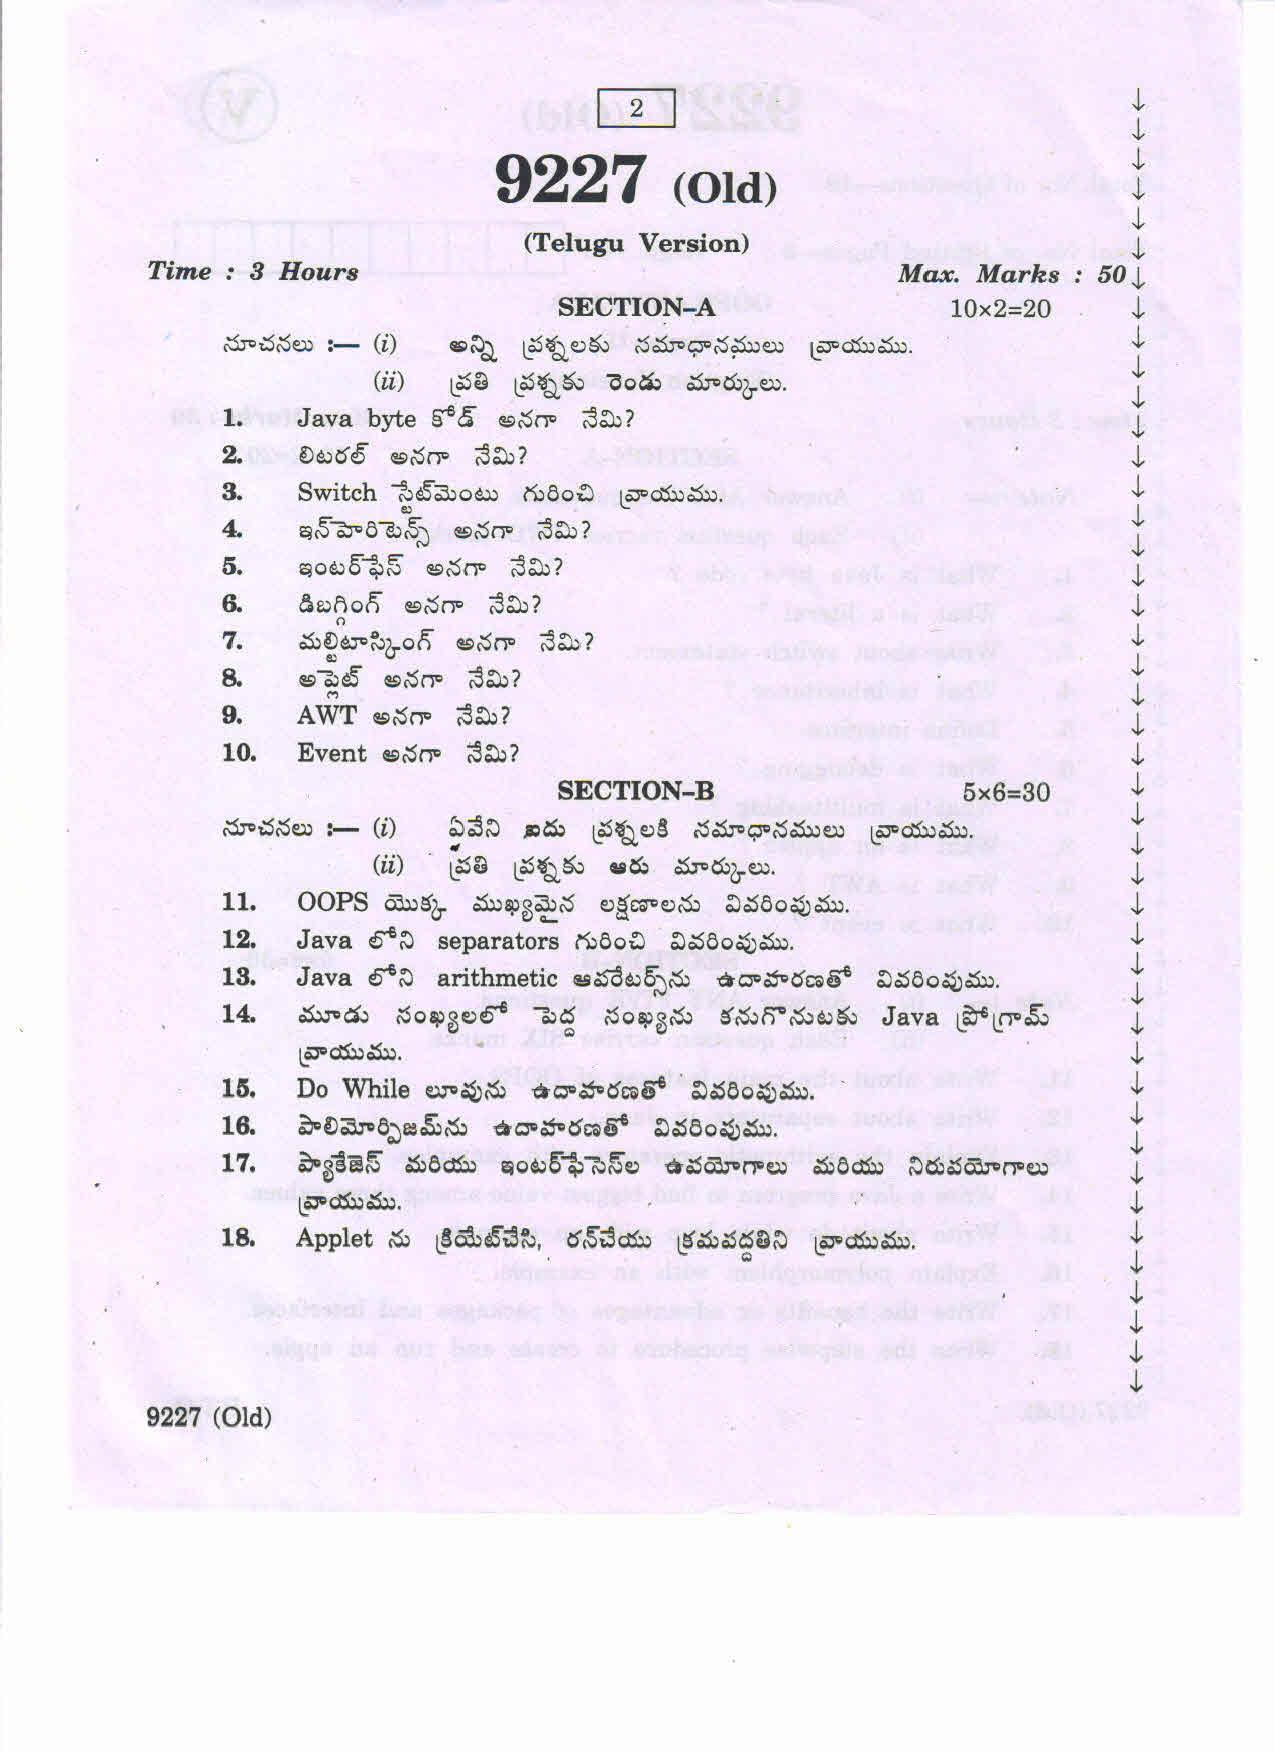 AP Inter 2nd Year Vocational Question Paper March - 2020 - Oops and Java - II (old) - Page 2